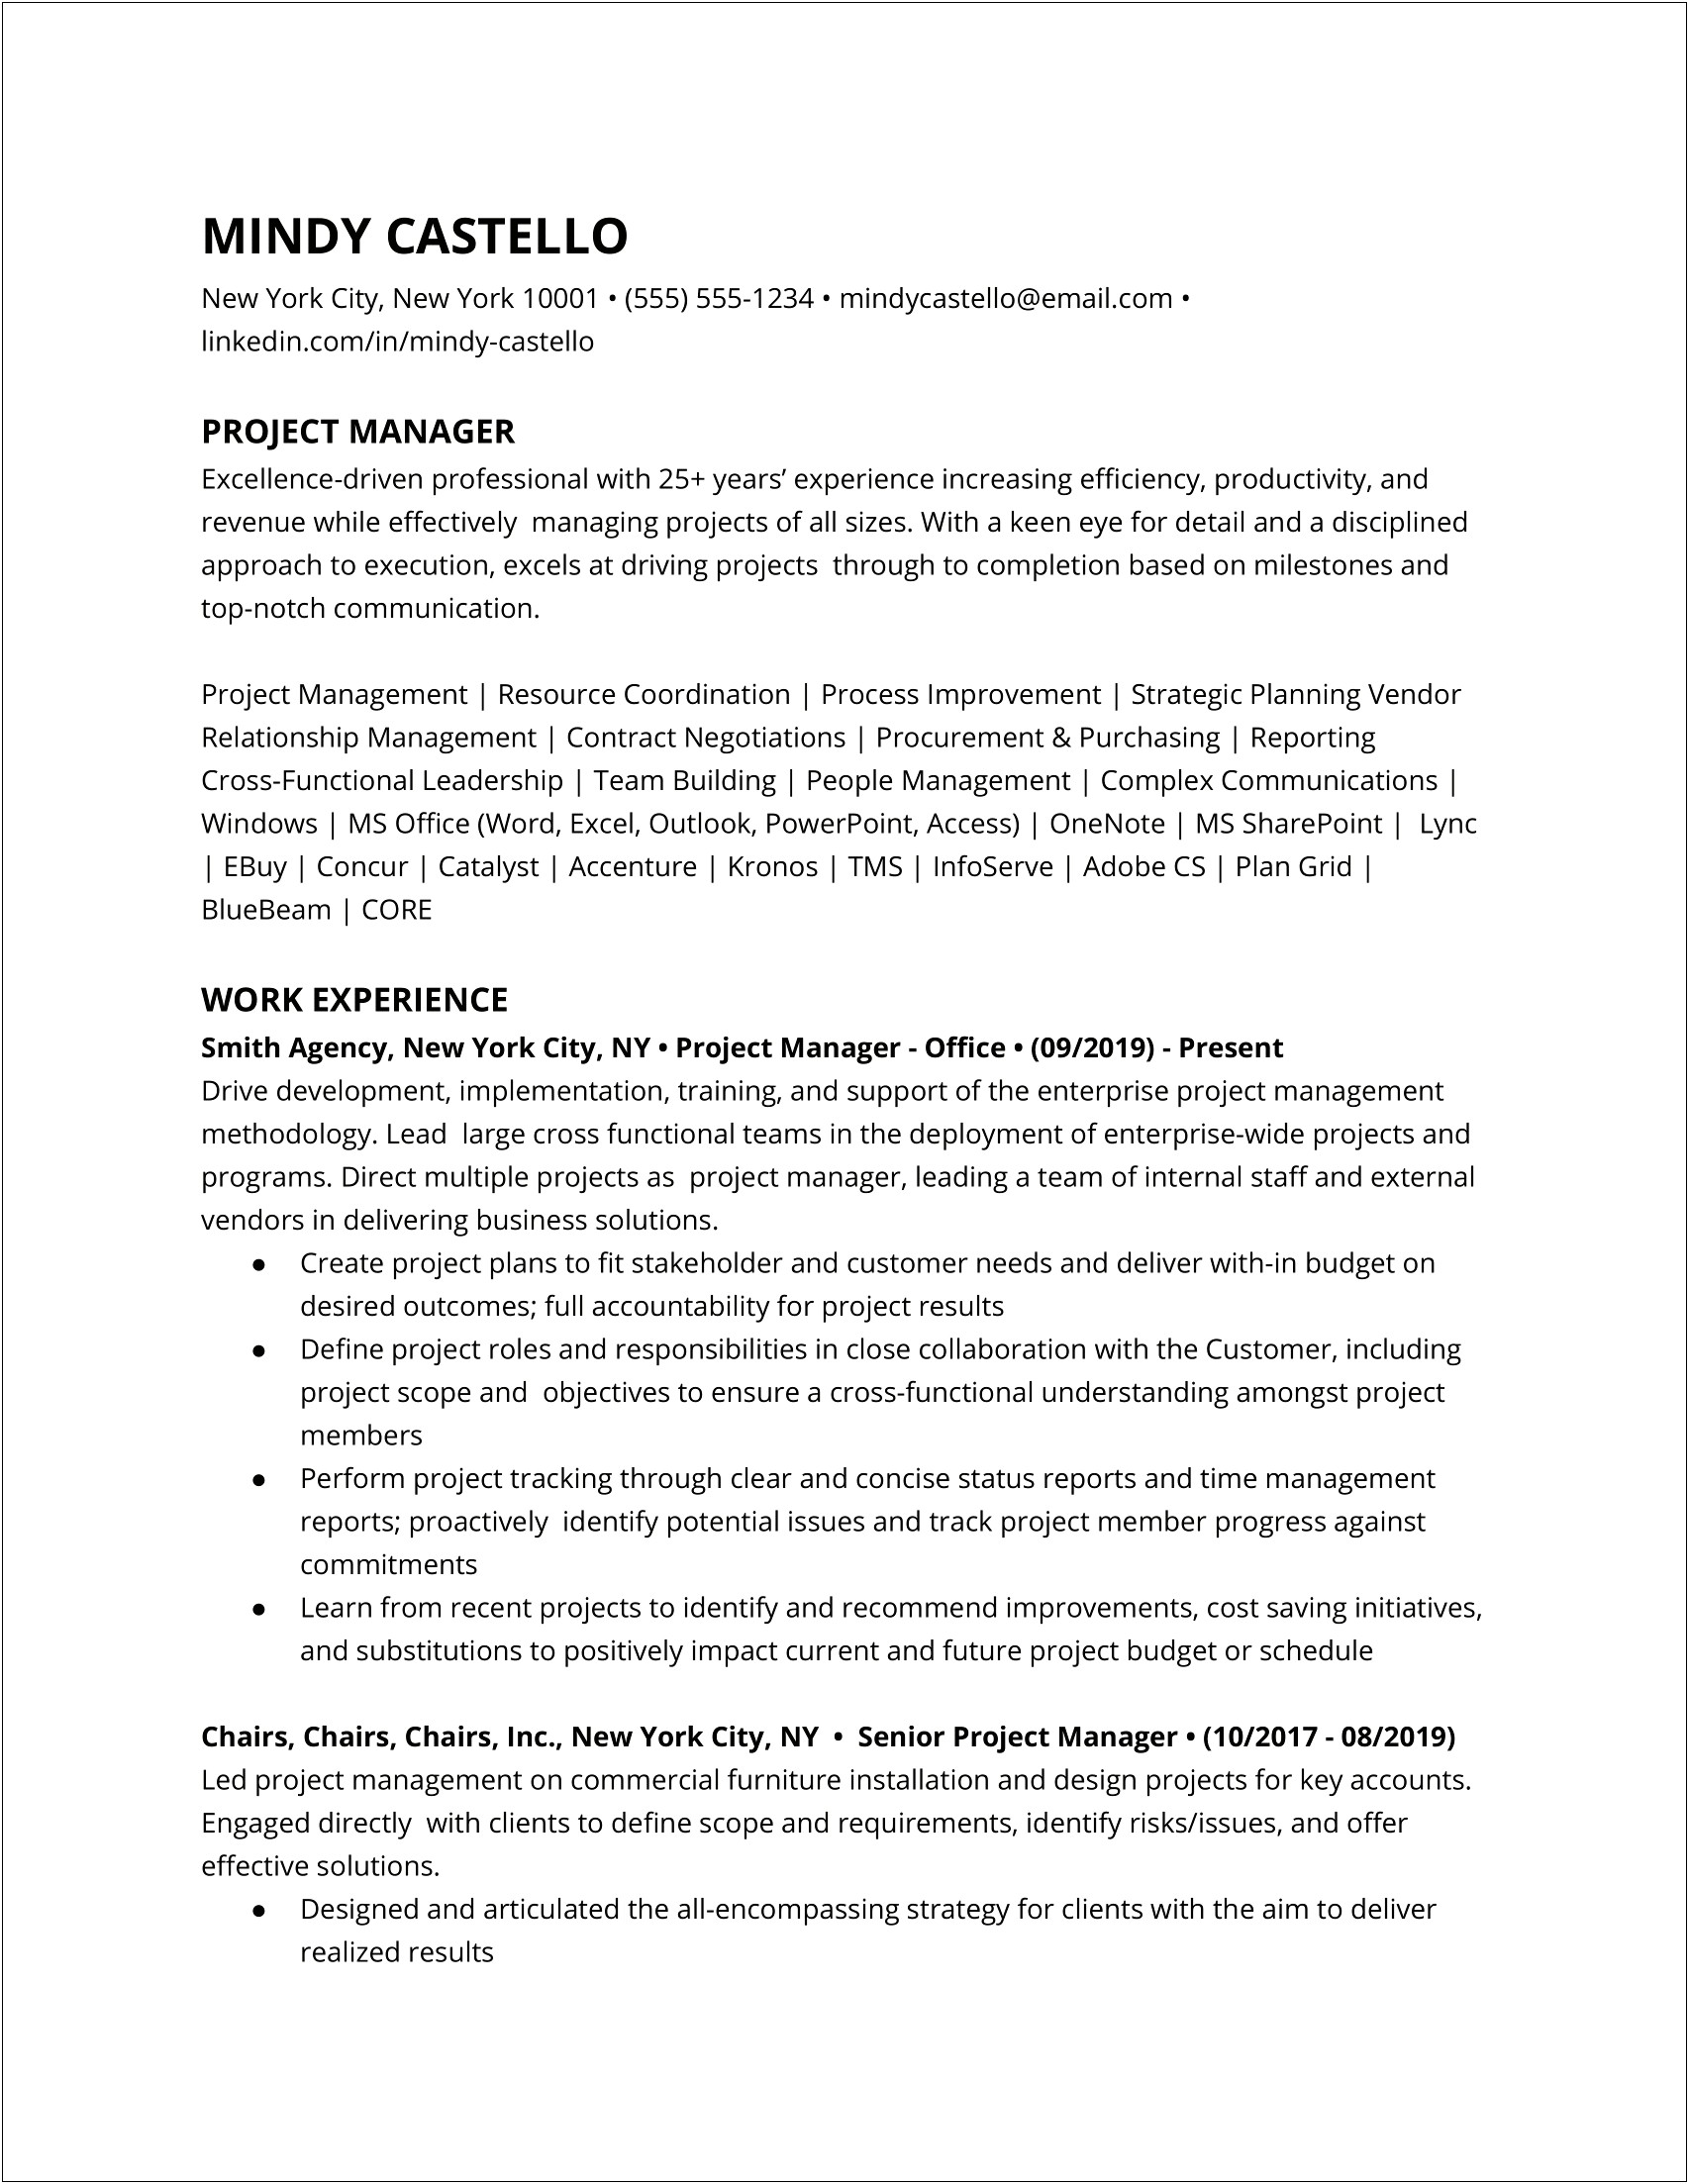 Sample Resume For Purchasing Manager For Construction Company